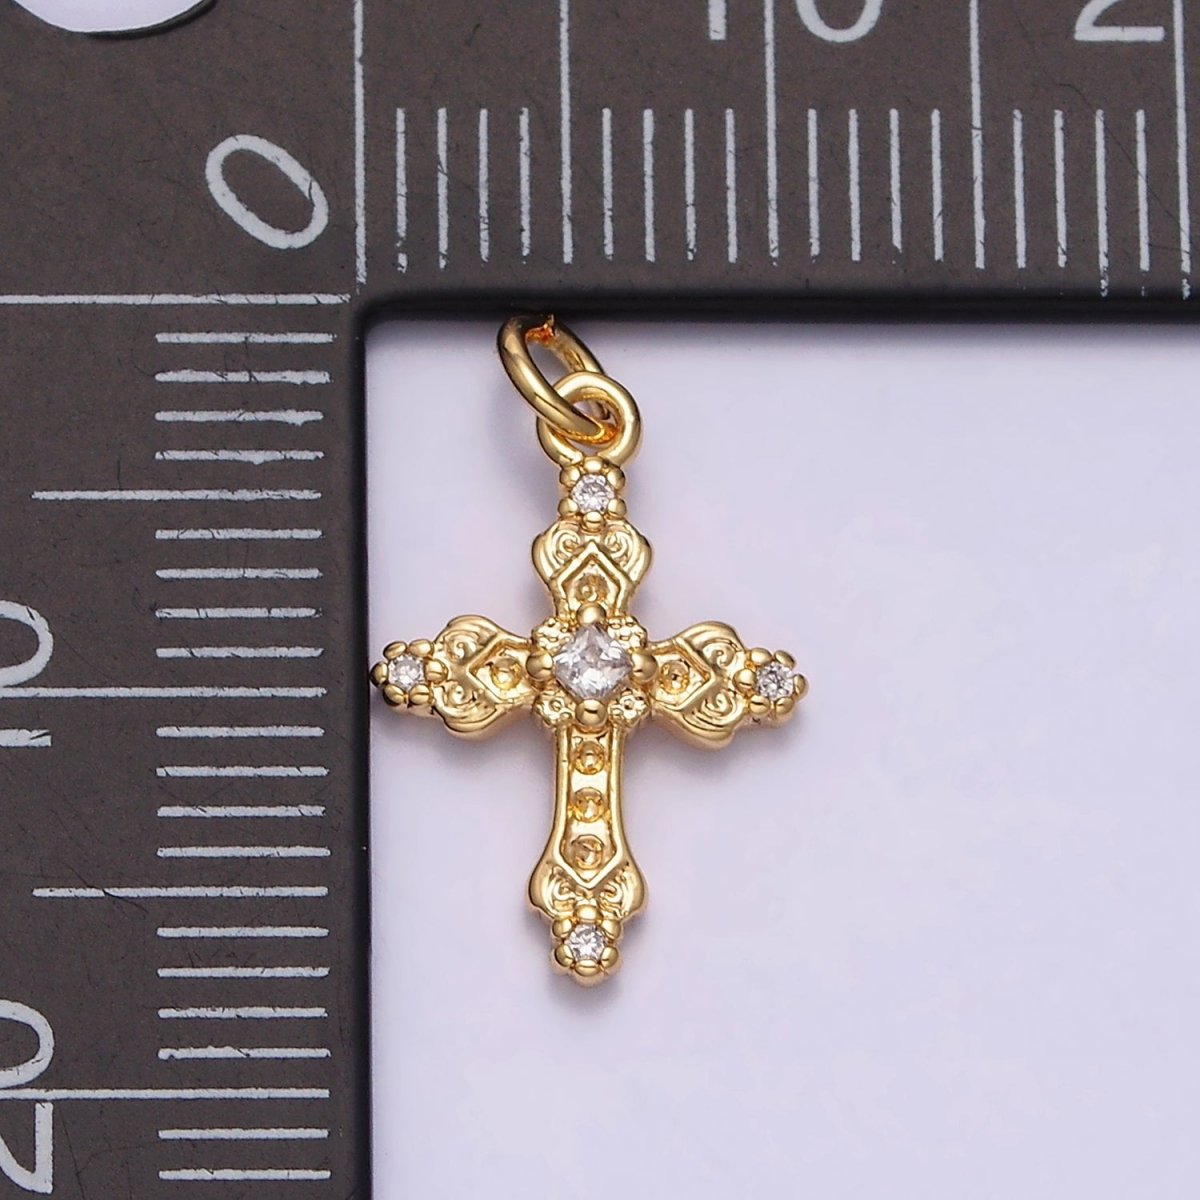 16K Gold Filled Artisan Textured Religious Cross Charm in Gold & Silver | AC1061 AC1062 - DLUXCA